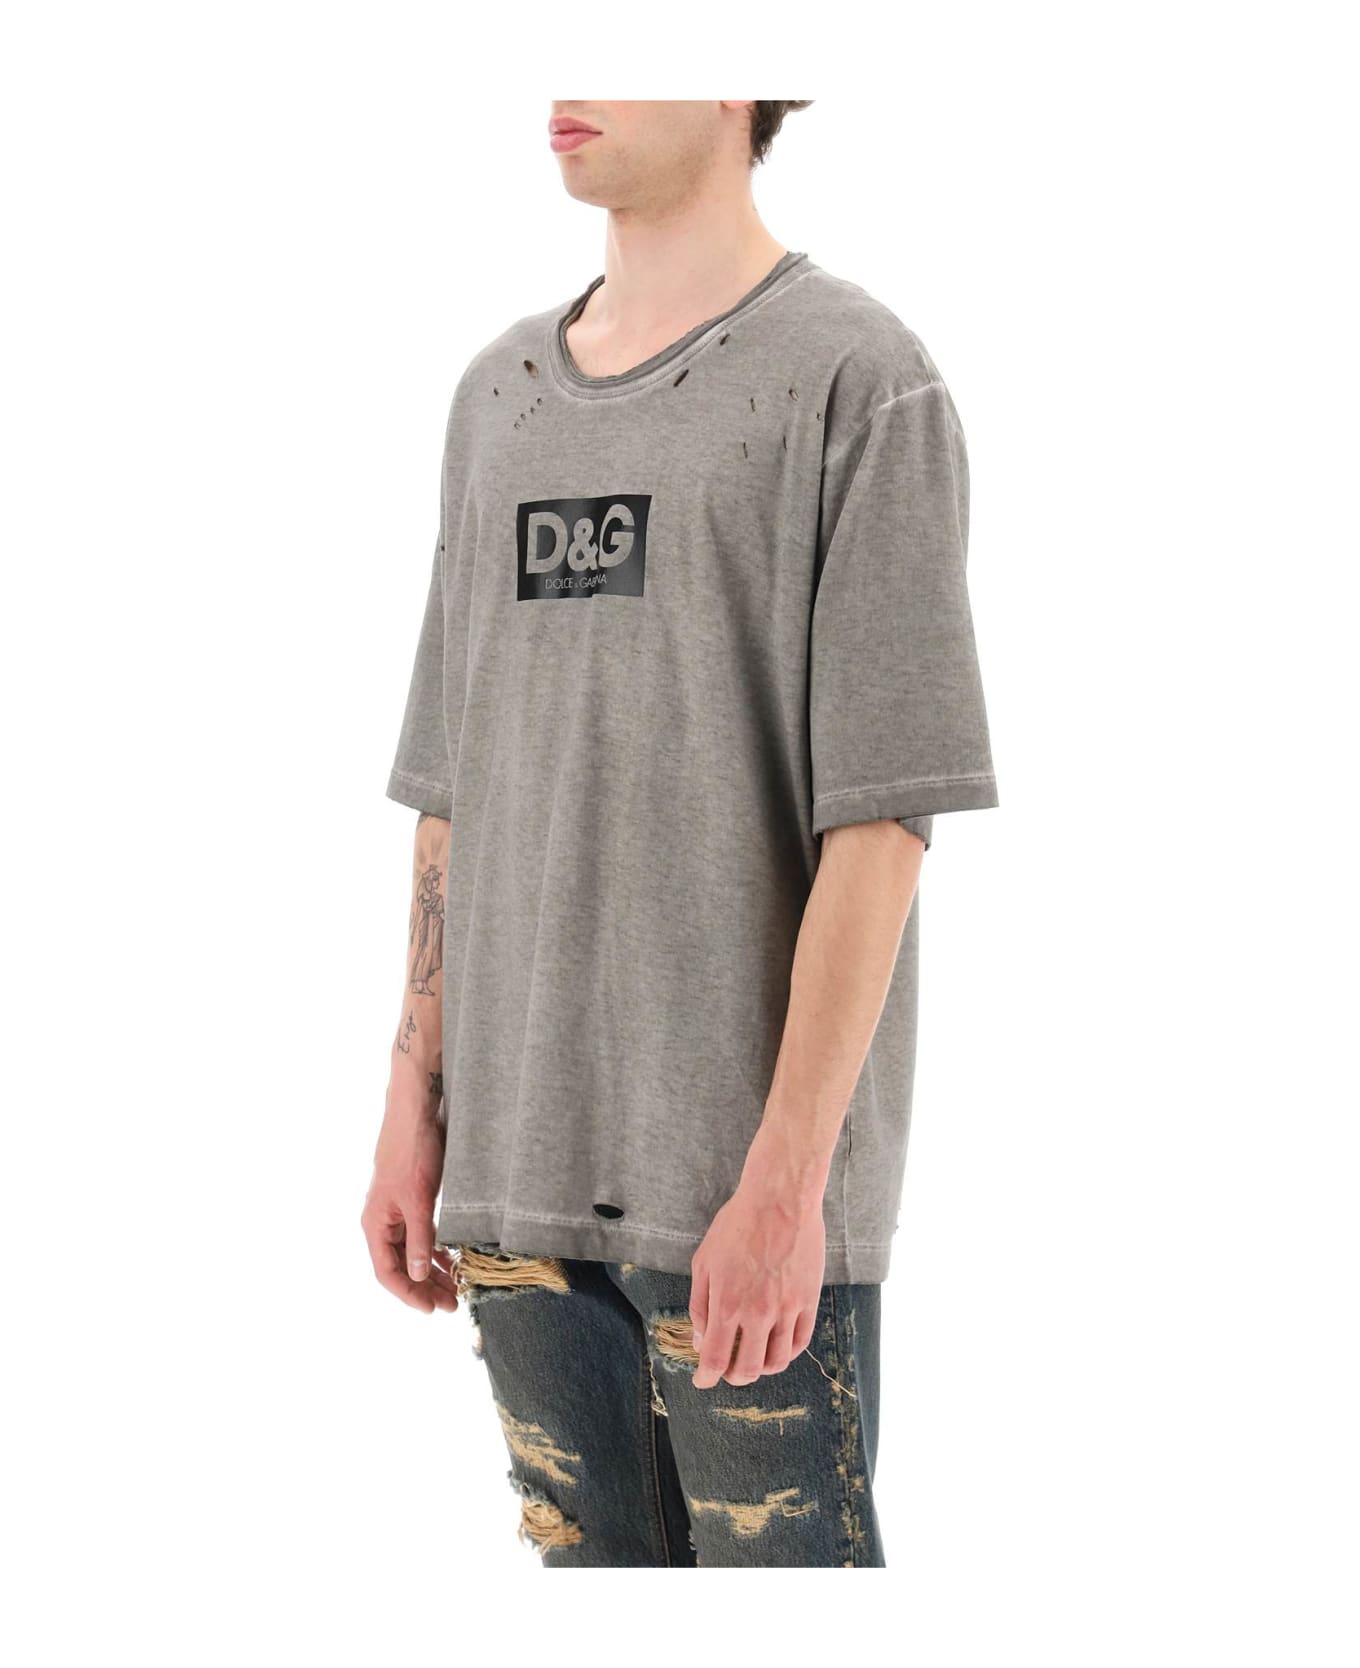 Dolce & Gabbana Washed Cotton T-shirt With Destroyed Detailing - VARIANTE ABBINATA (Grey) シャツ